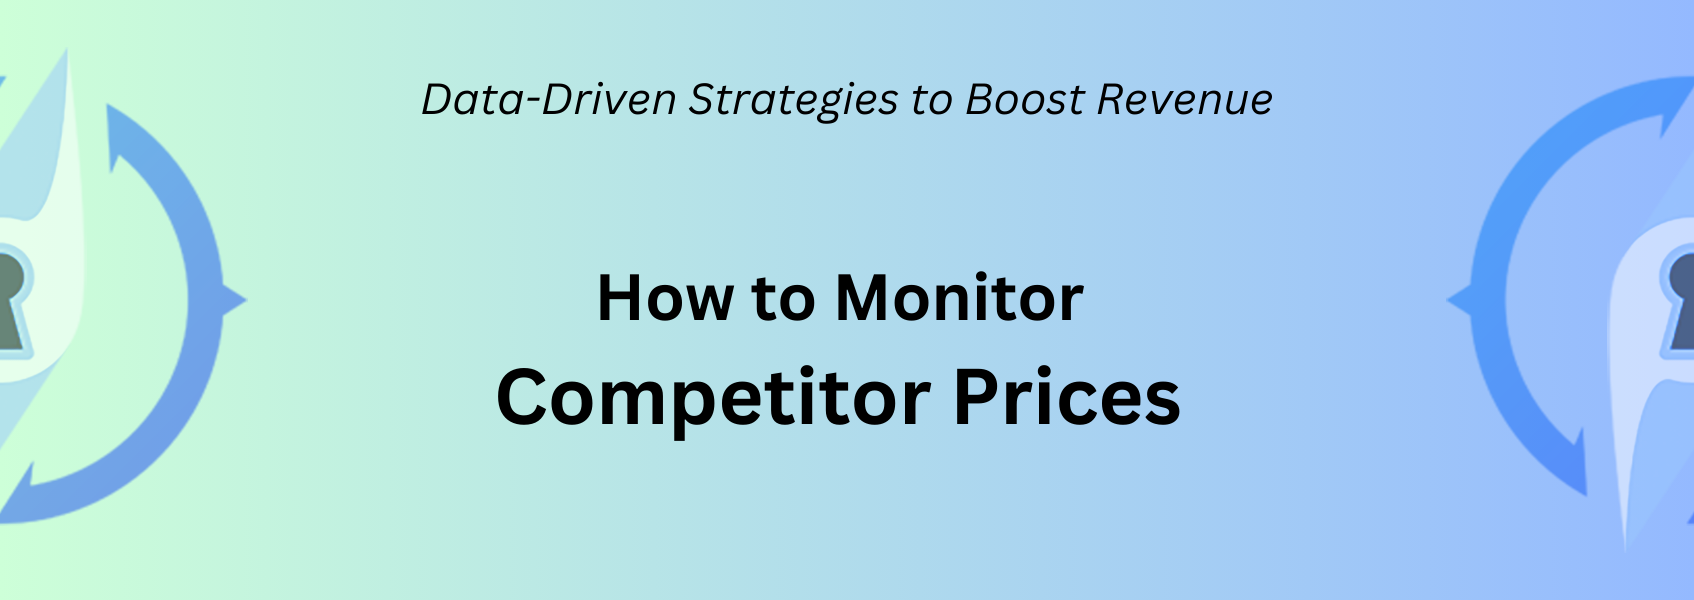 How to Monitor Competitor Prices